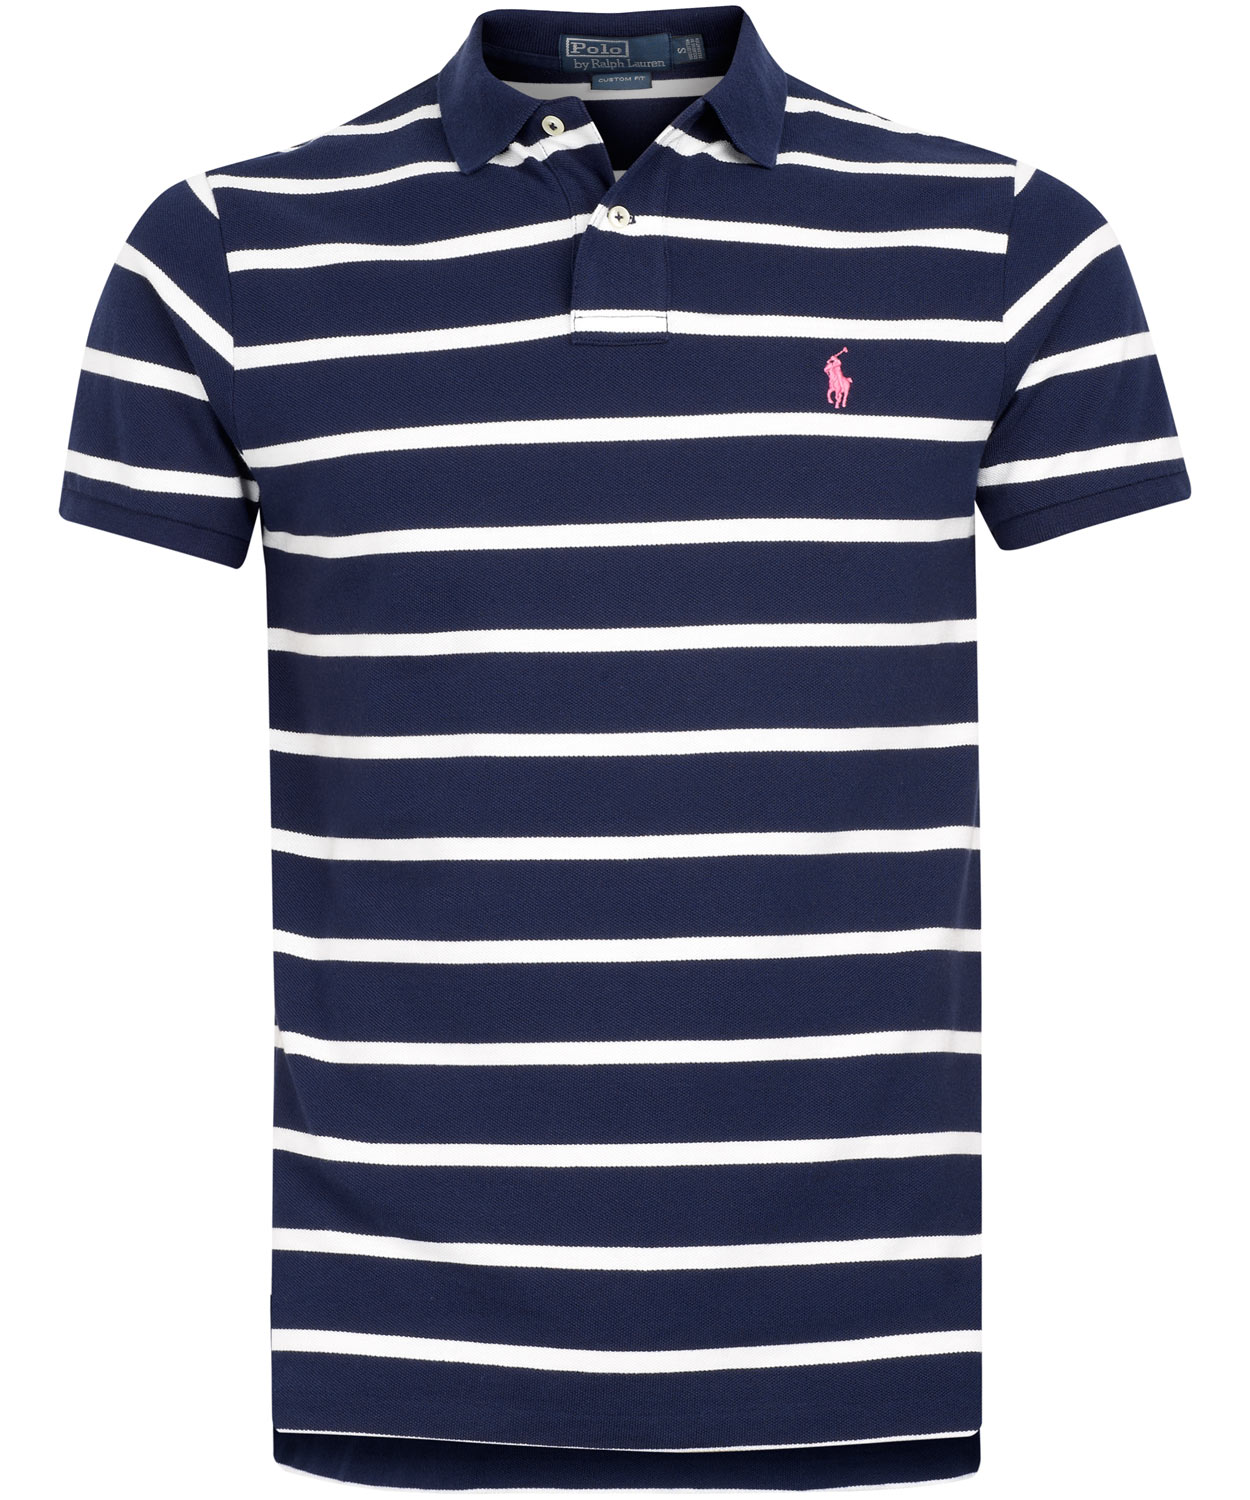 Lyst - Polo Ralph Lauren Navy and White Stripe Polo Shirt in Blue for Men